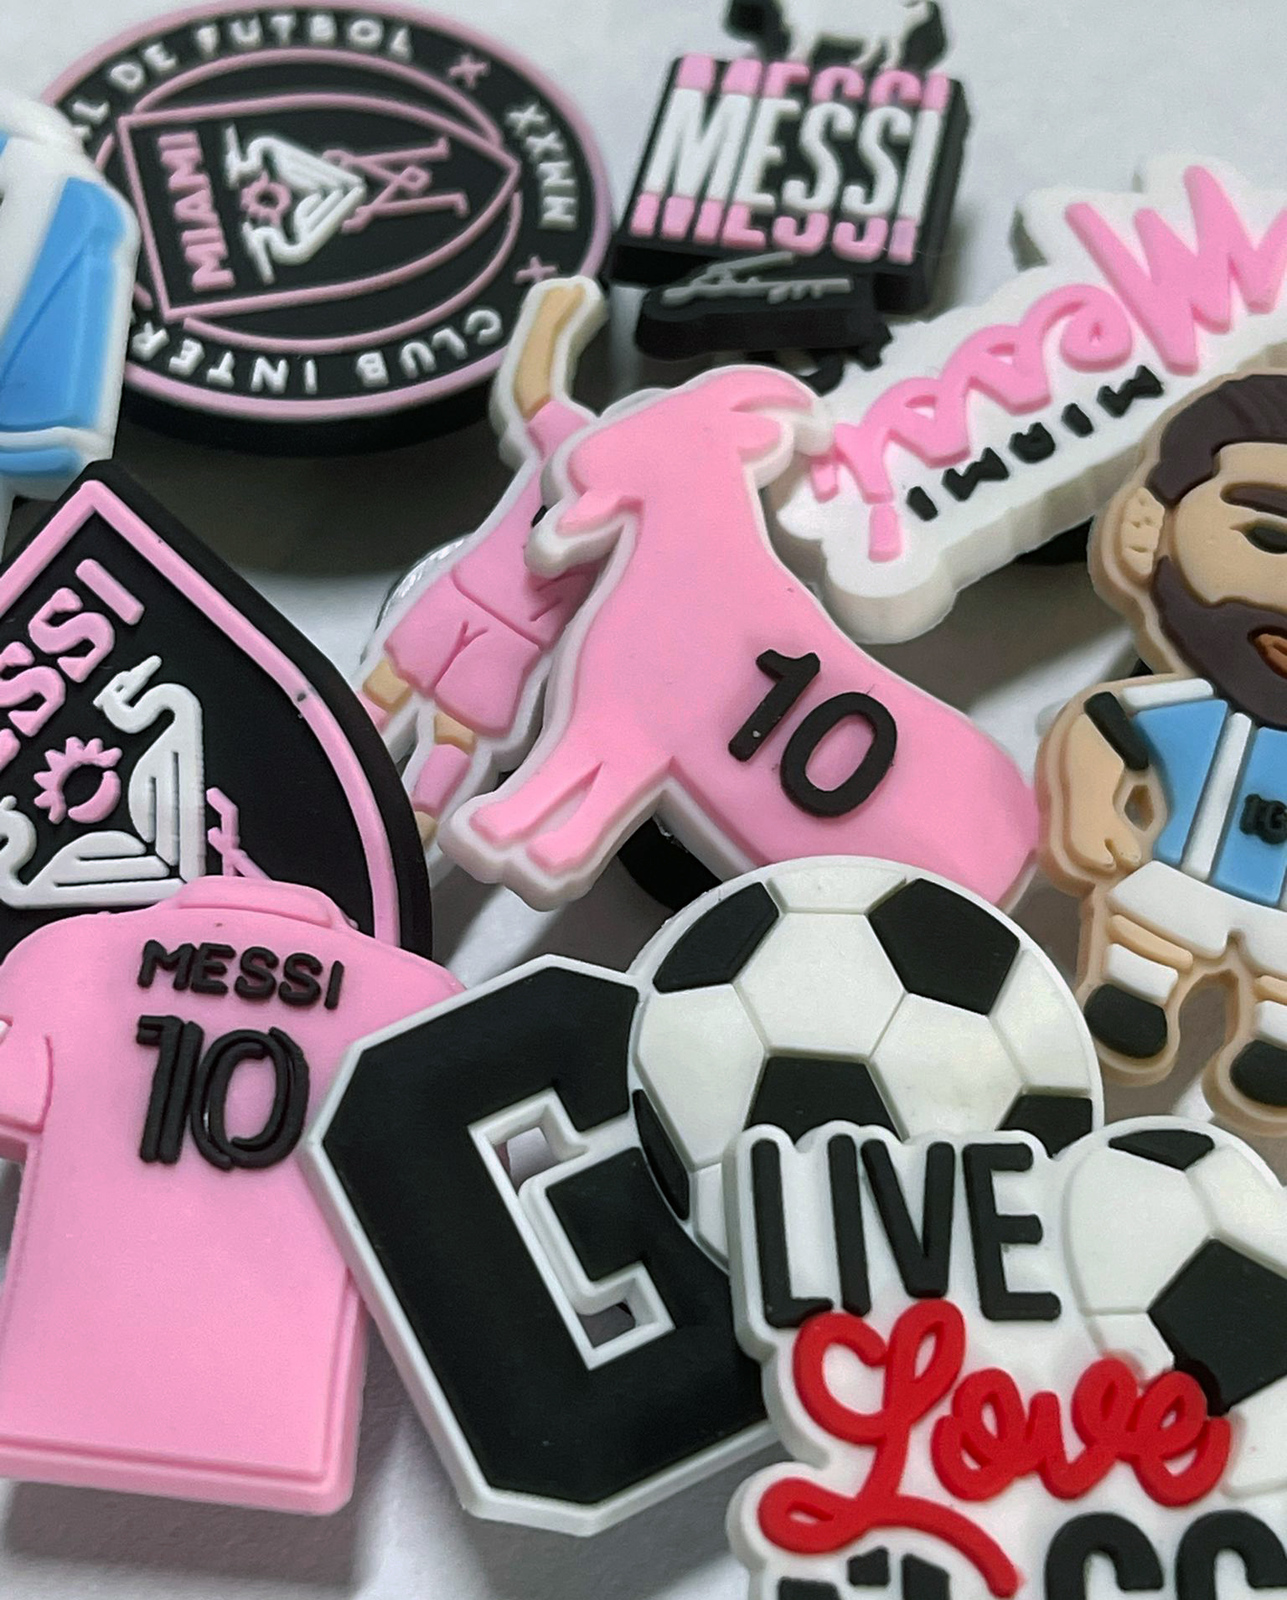 Bundle of Messi Croc Charms, Messi Jibbitz charms. Inspired by